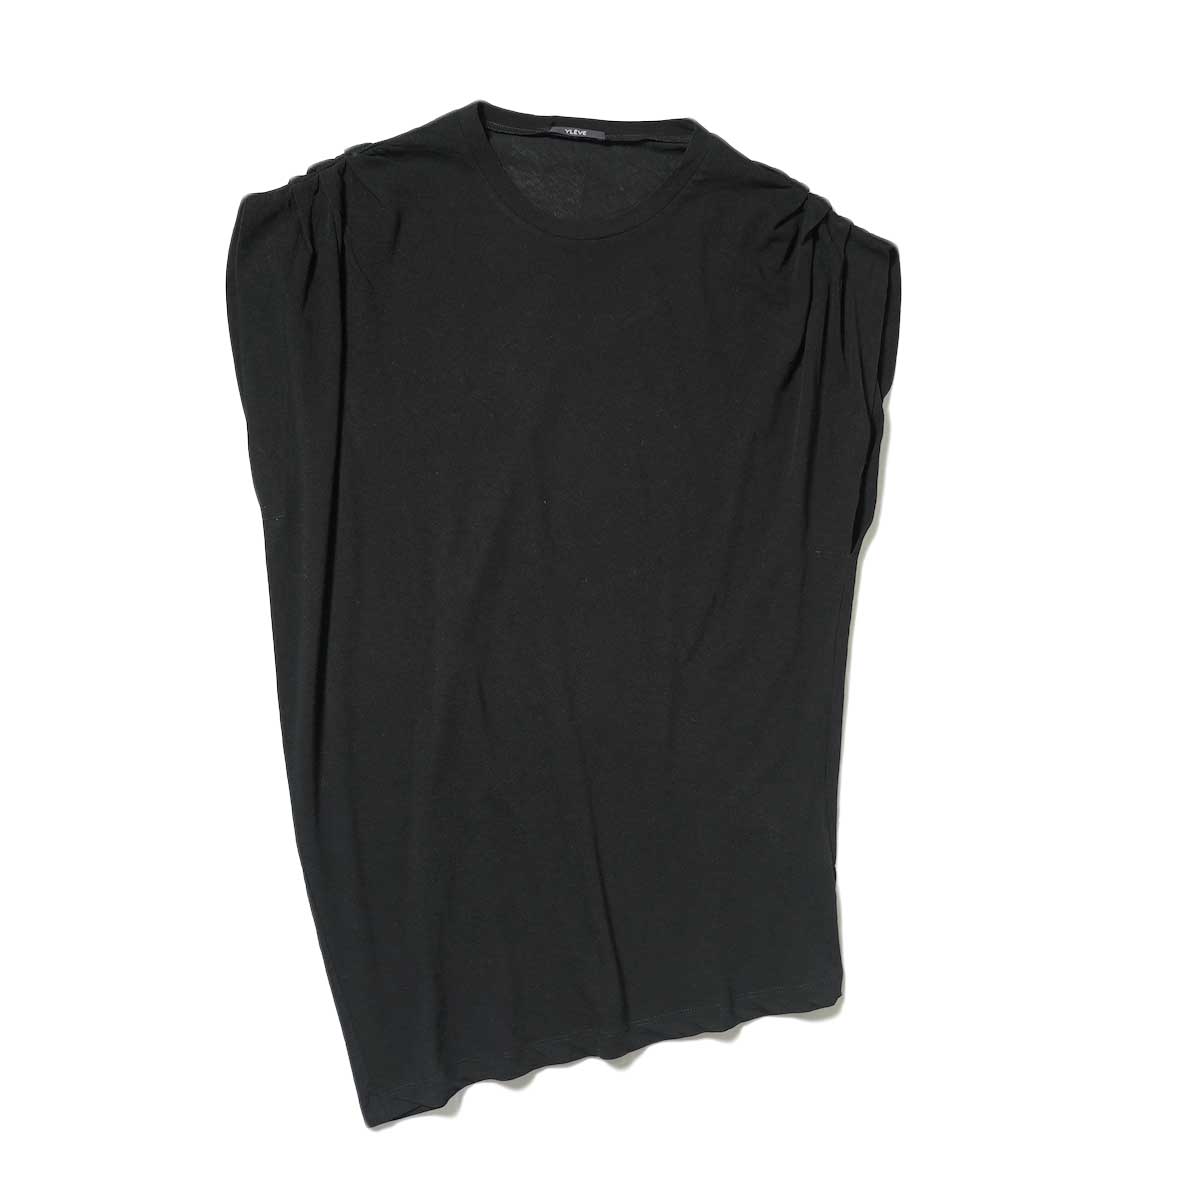 YLEVE / COTTON LINEN SHEER JERSEY TACK N/S P/O (Black)